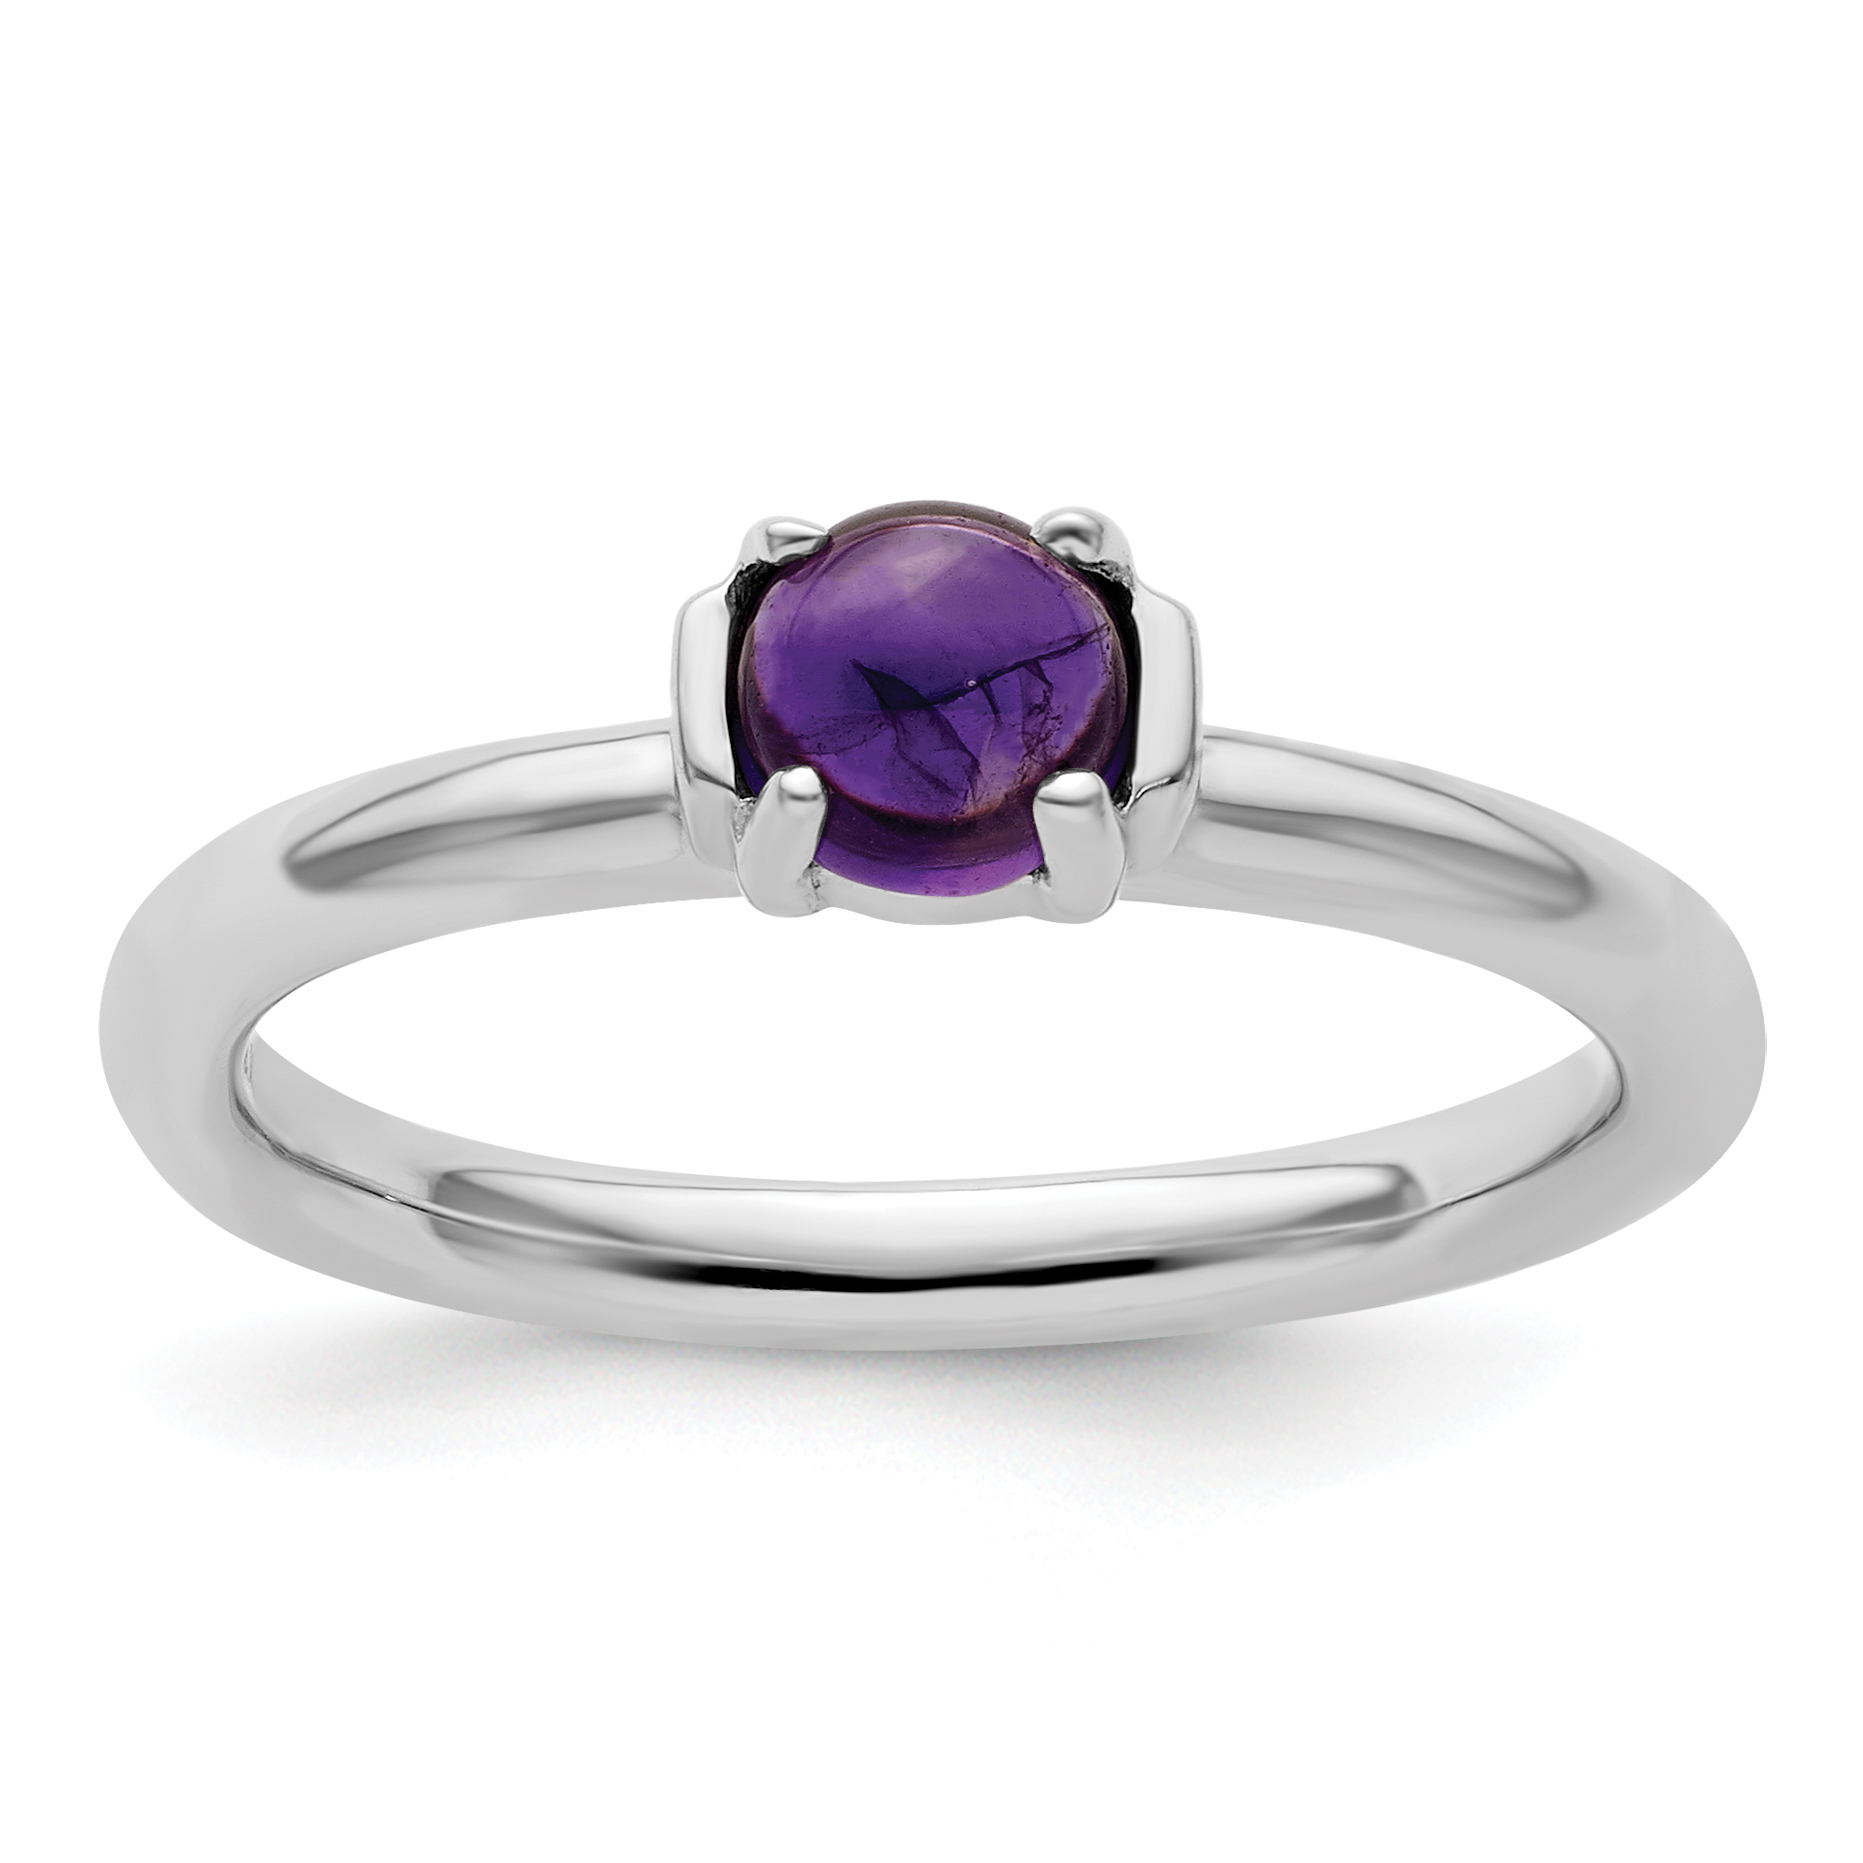 Stackable Expressions Sterling Silver Stackable Expressions Polished Amethyst Ring